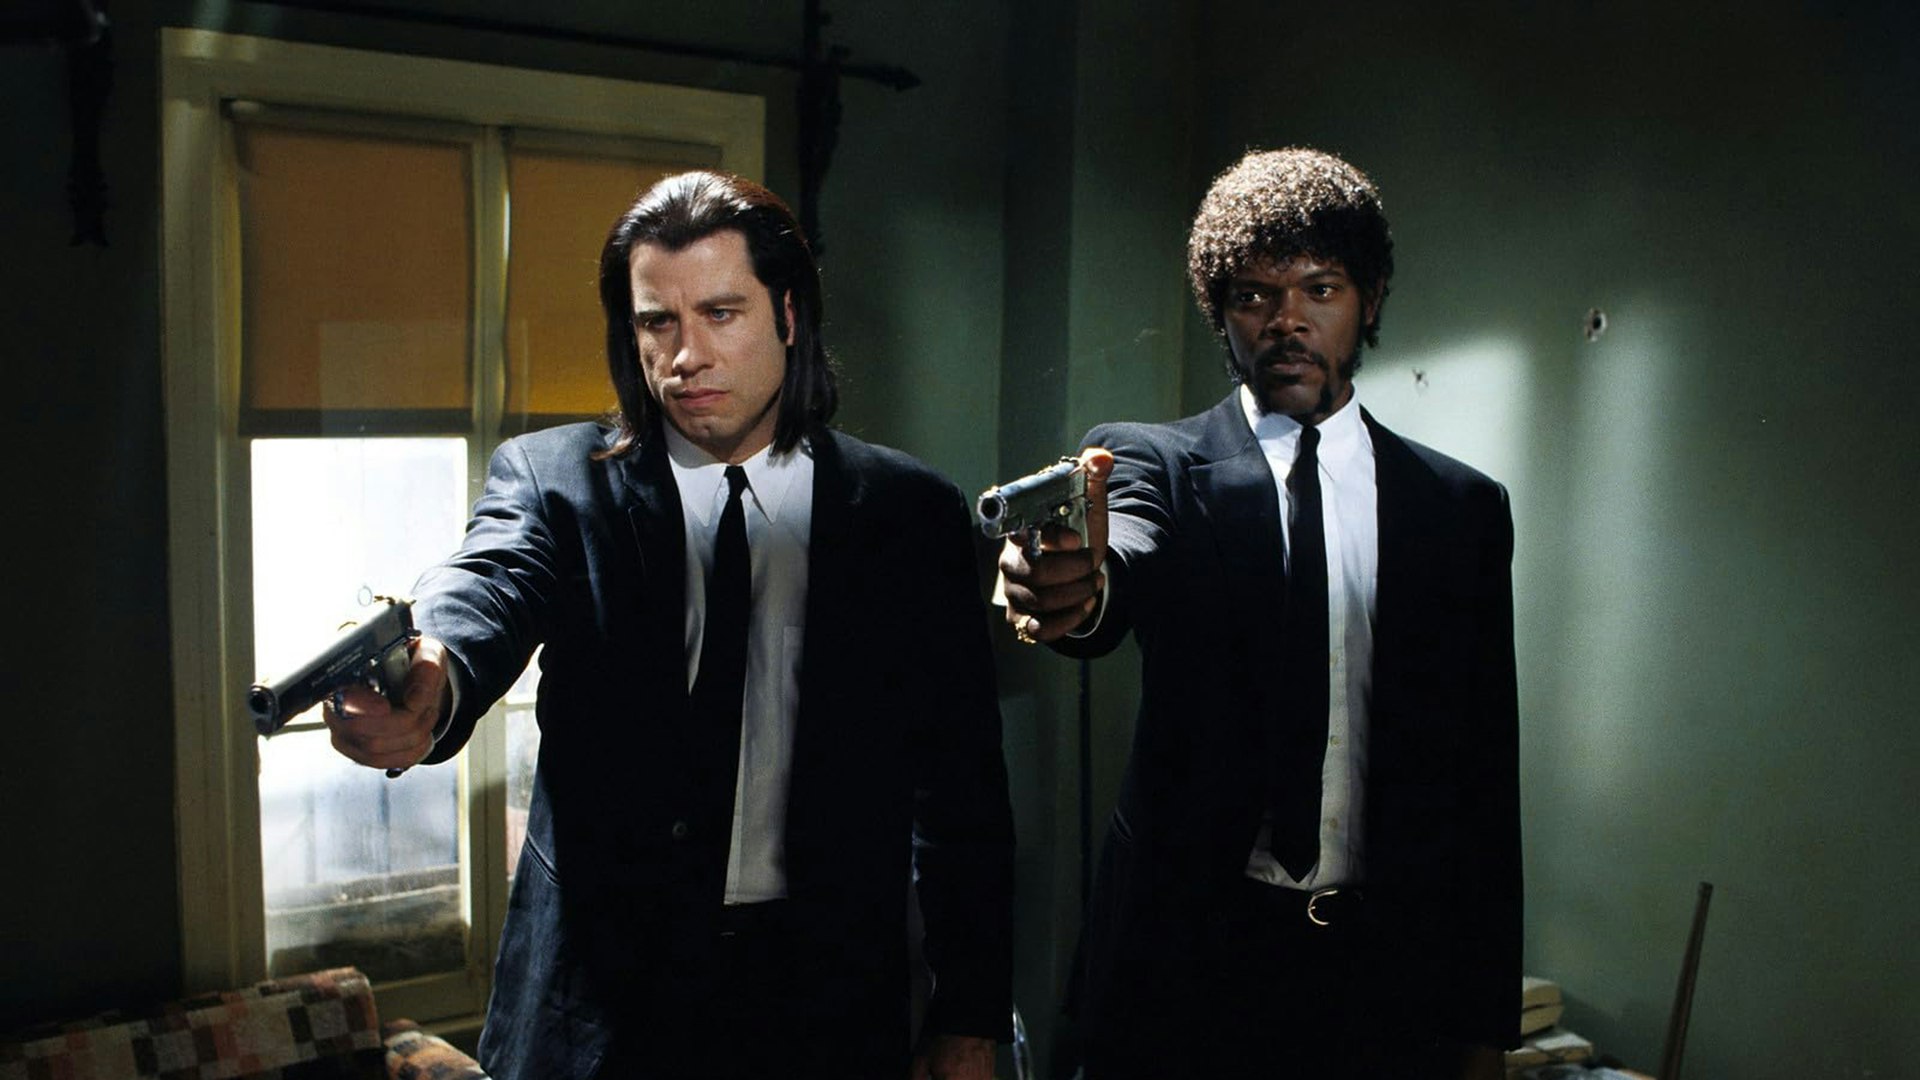 Pulp Fiction - Movie Review - The Austin Chronicle